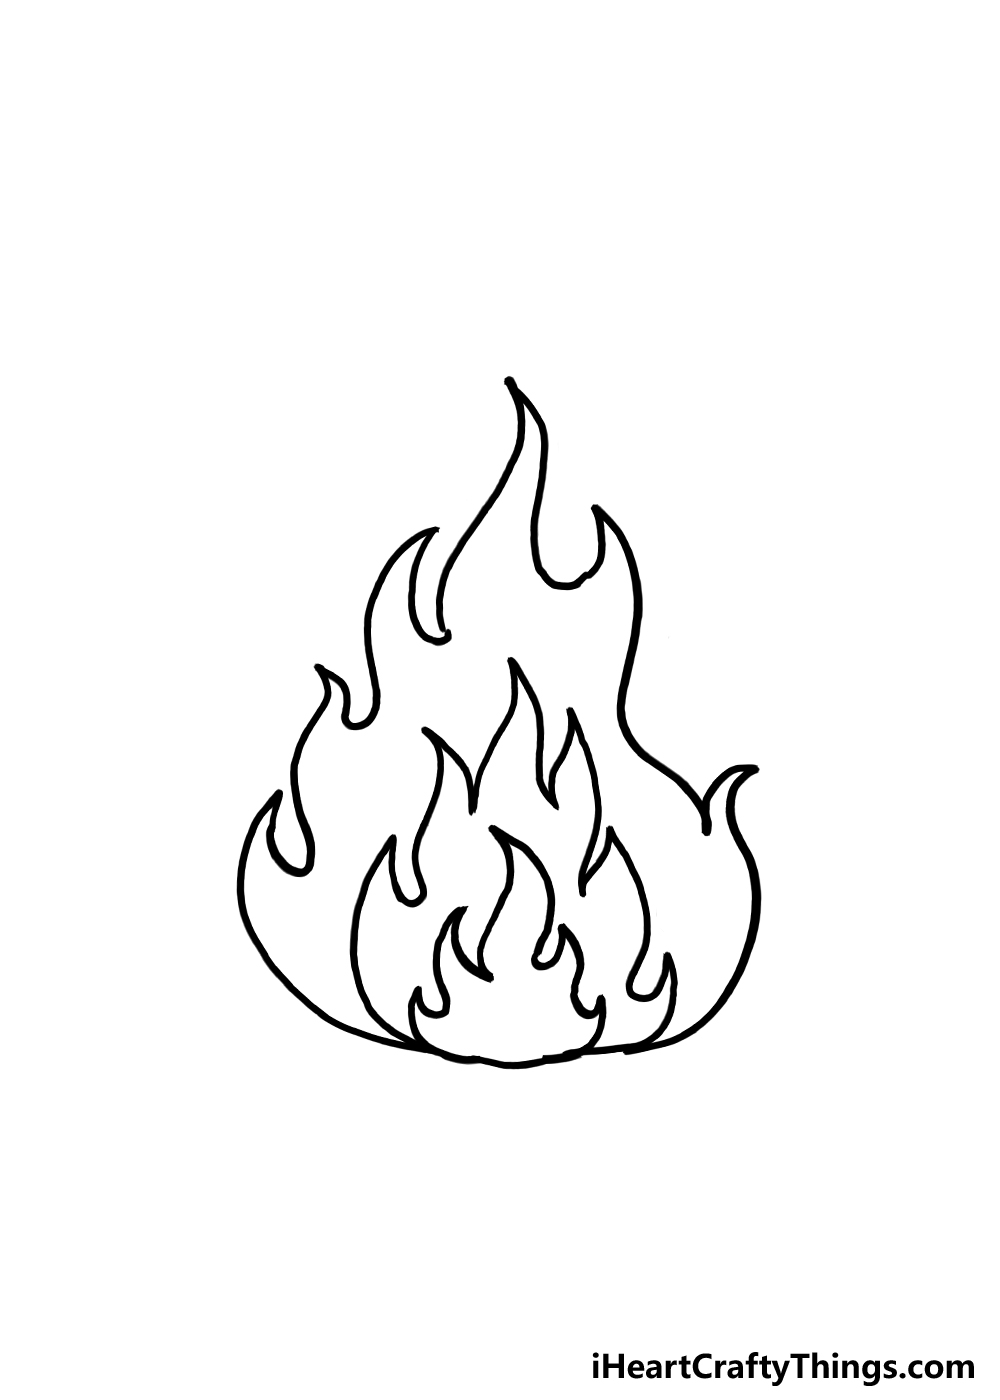 How to Draw Flames step 4